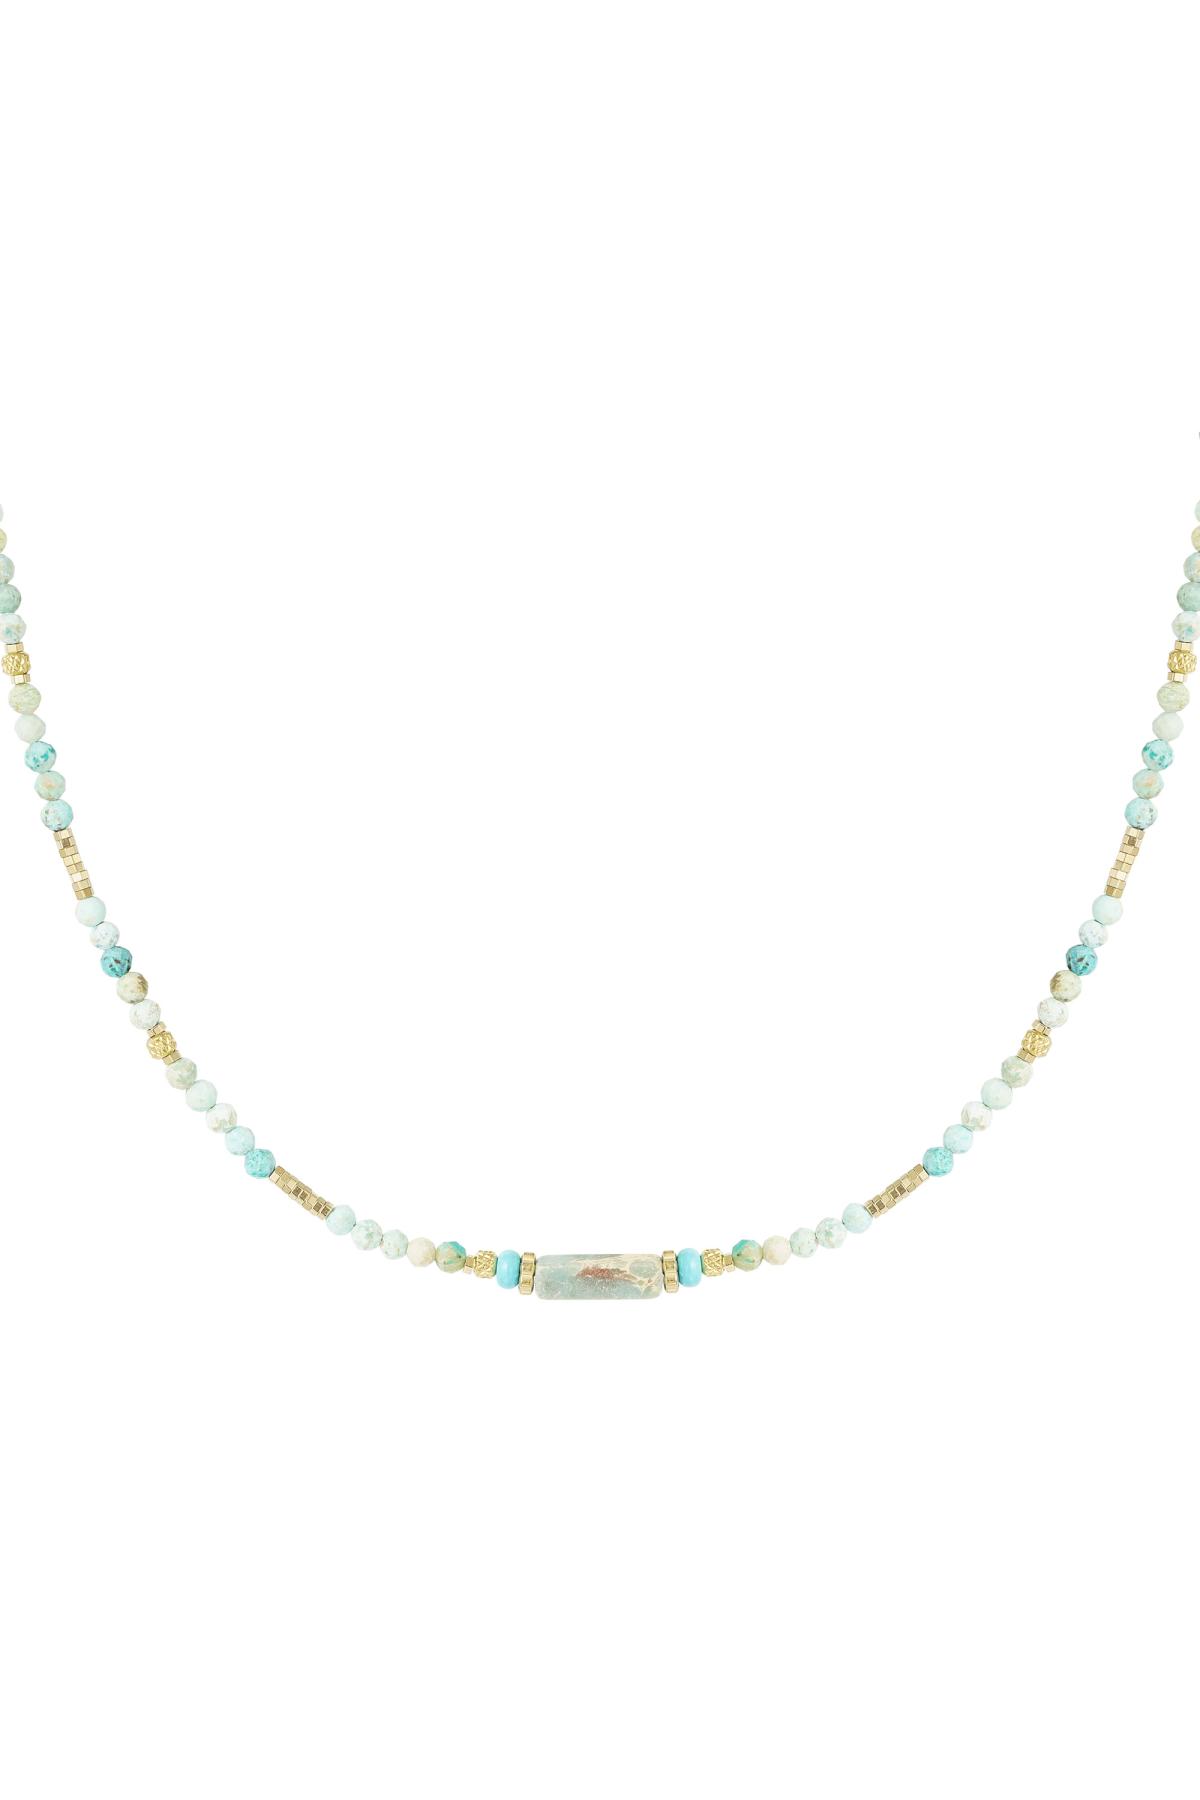 Collana tante perle - Collezione pietre naturali Turquoise & Gold Stainless Steel 